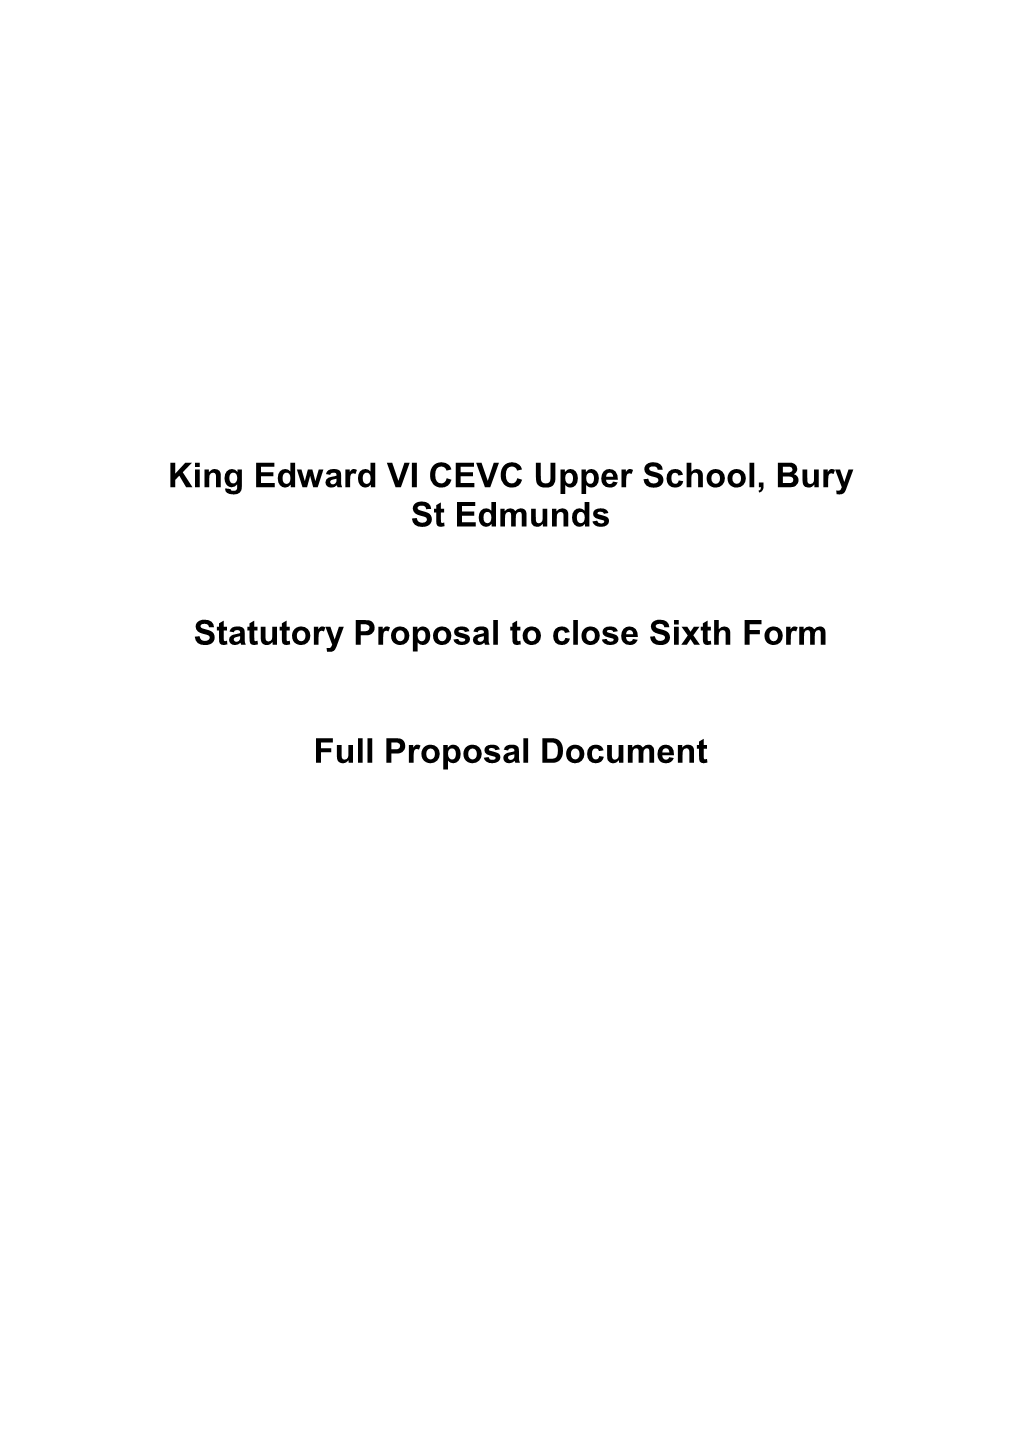 Information to Be Specified for Closure Proposals